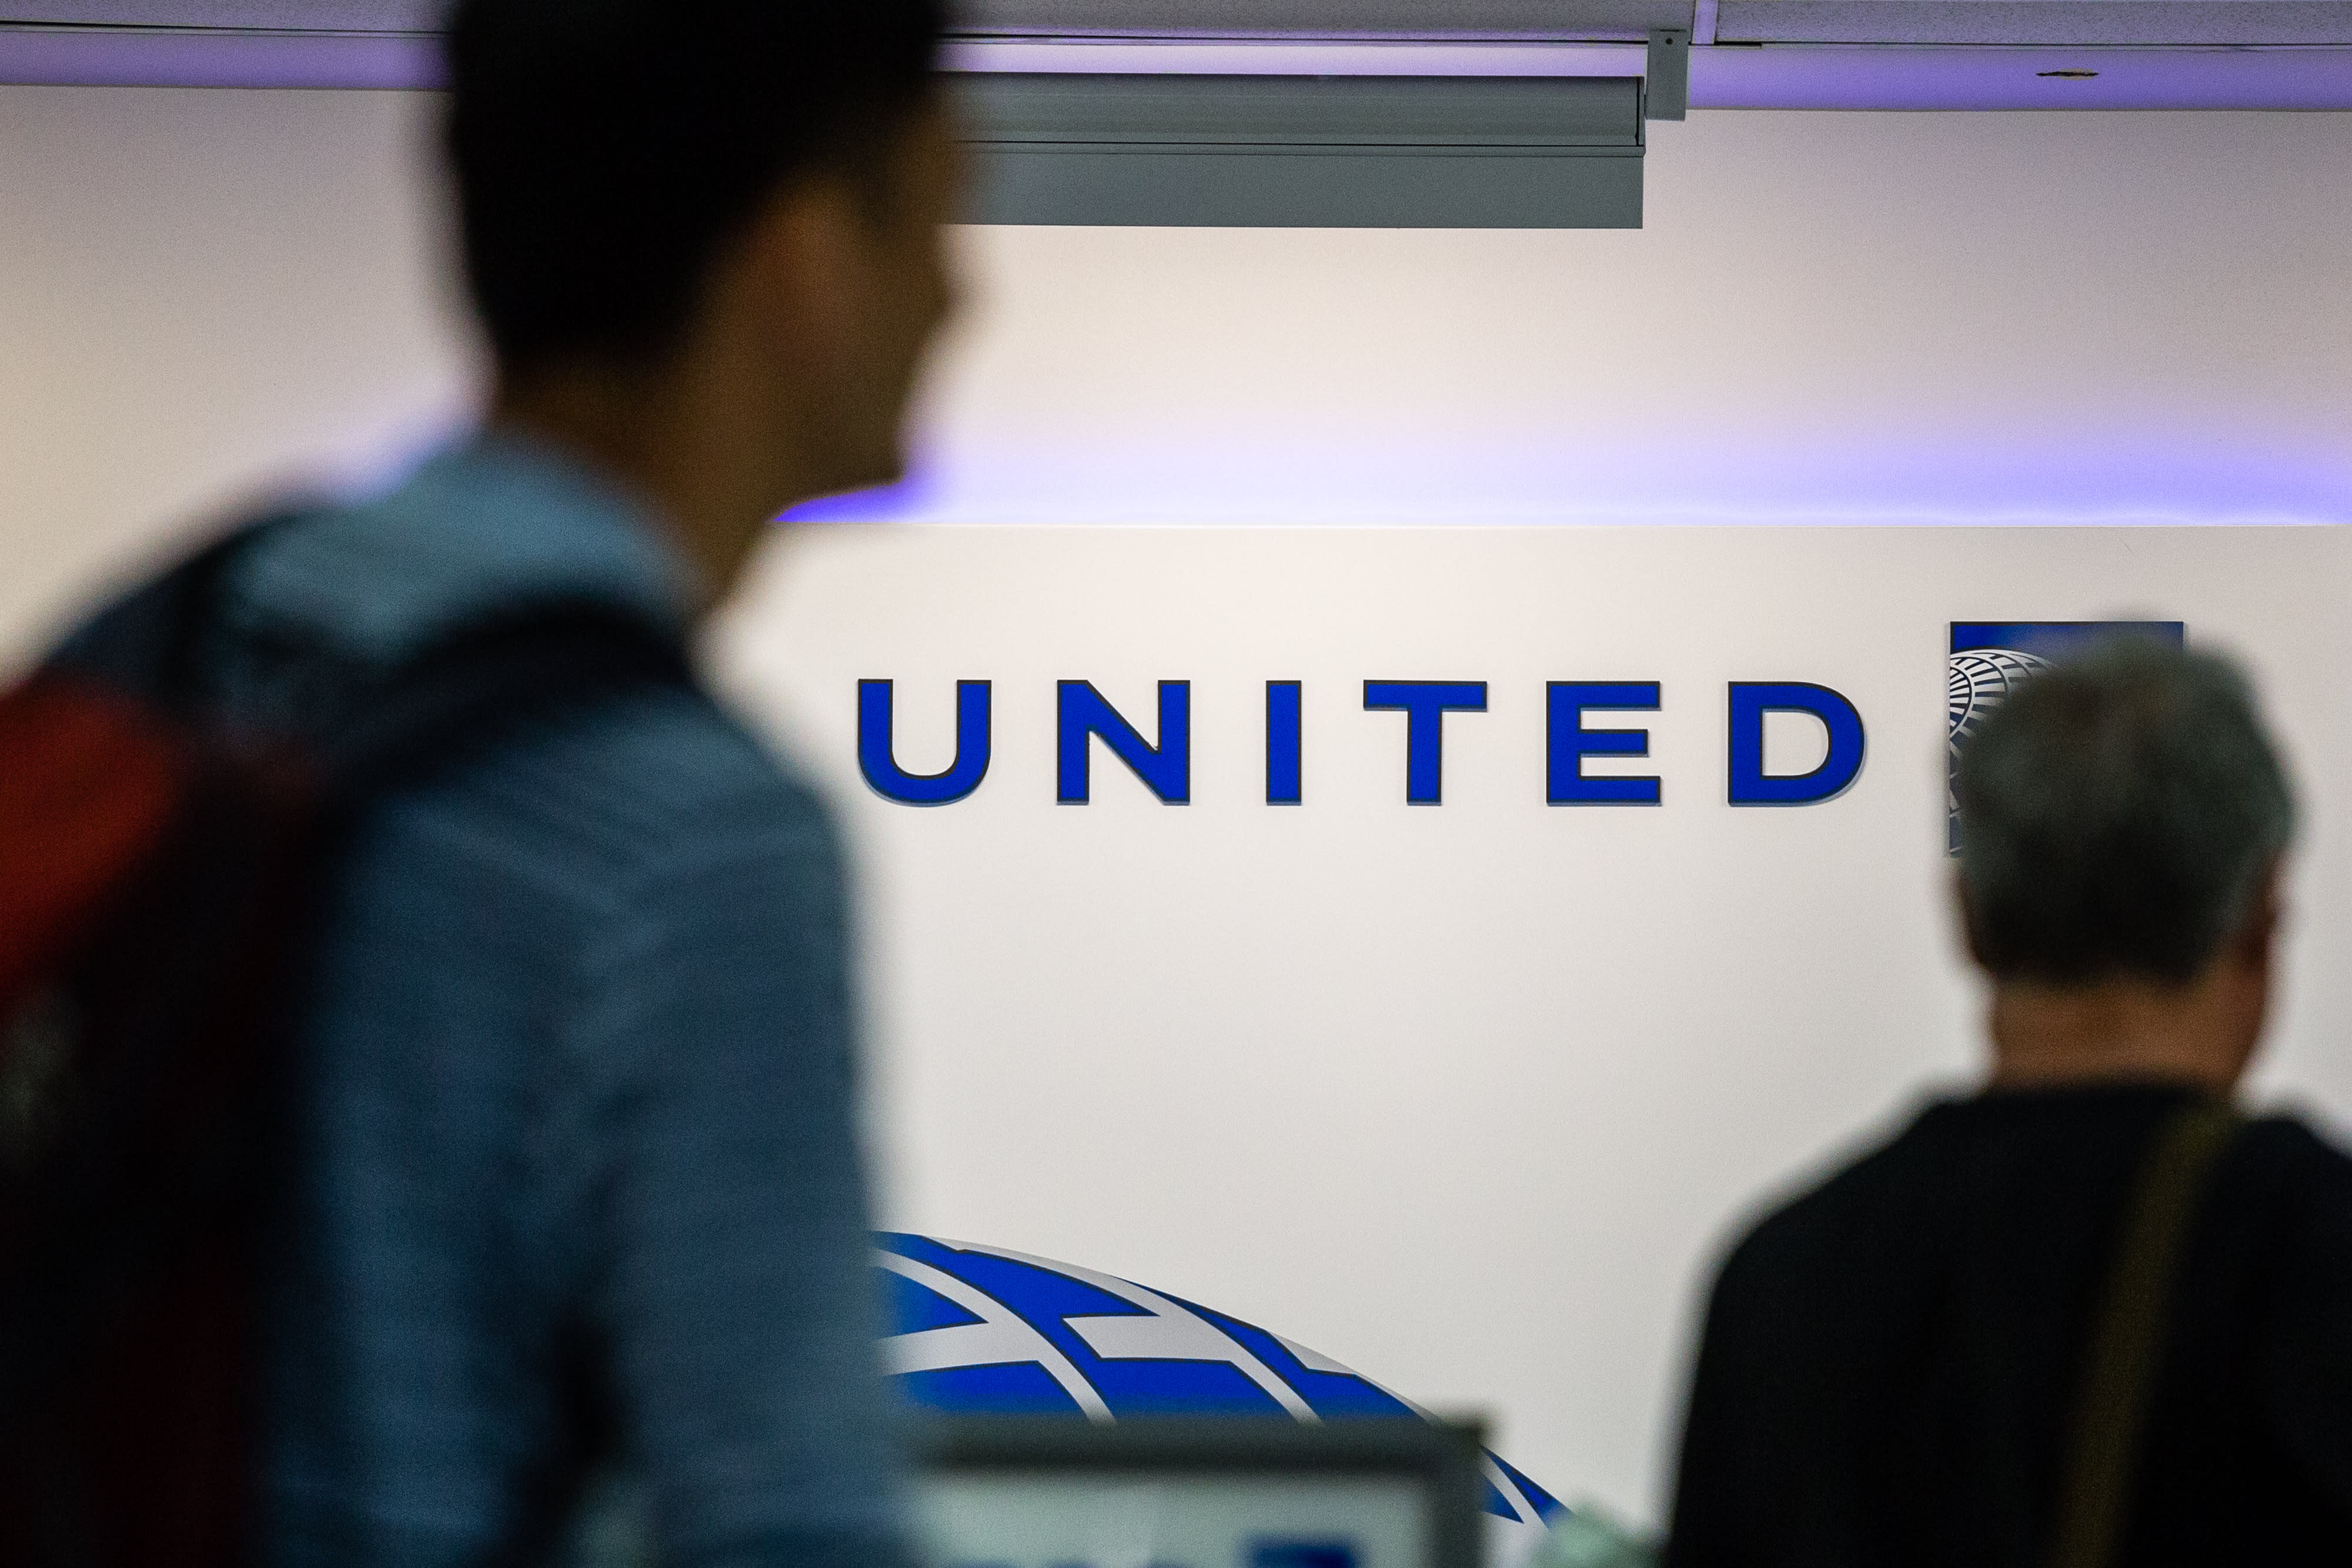 Woman Claims She Was Kicked In The Head By United Airlines Employee